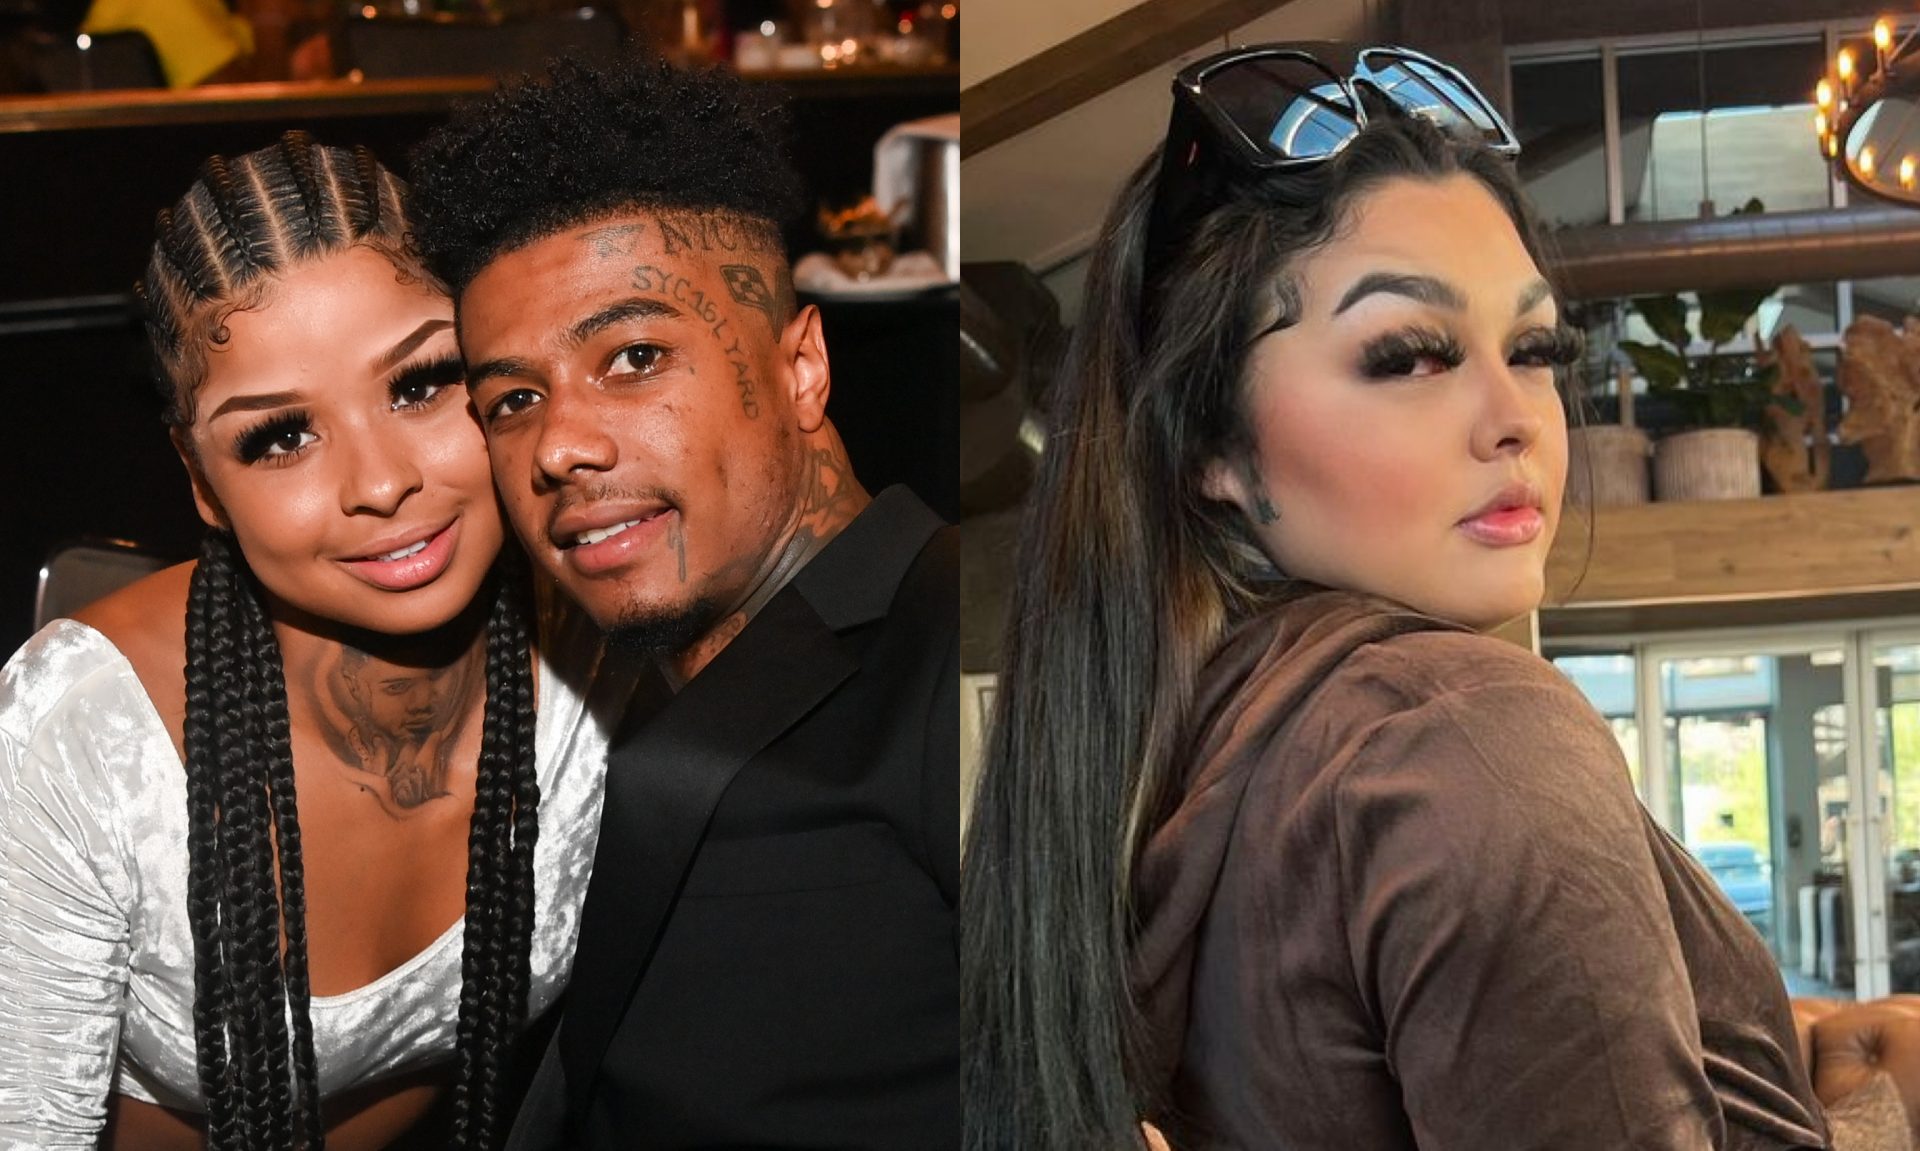 Blueface And Chrisean Trade Insults Online After Rock Calls Jaidyn Alexis A "Broke B***h"